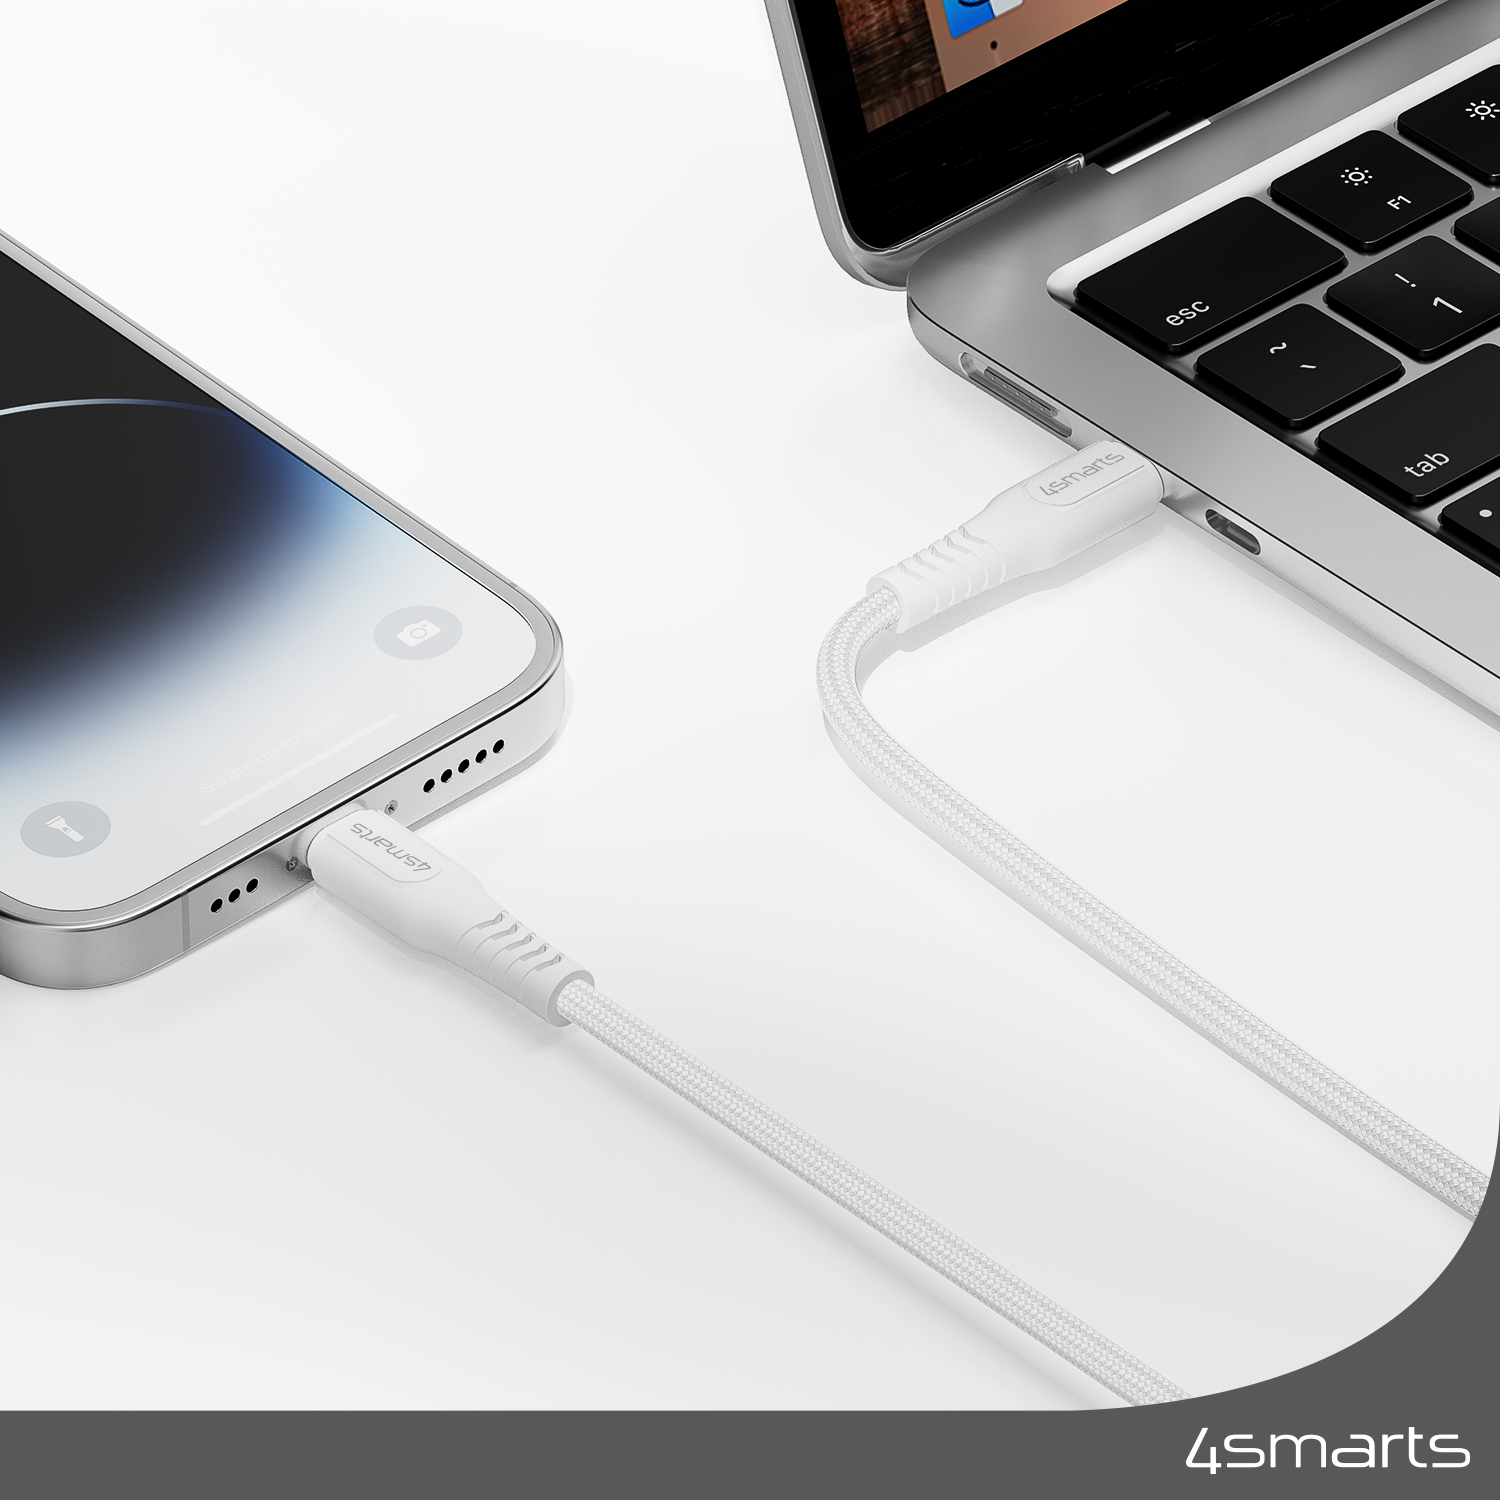 The 4smarts USB-C to Lightning cable RapidCord PD 30W lets you charge your phone and transfer data at lightning speed.